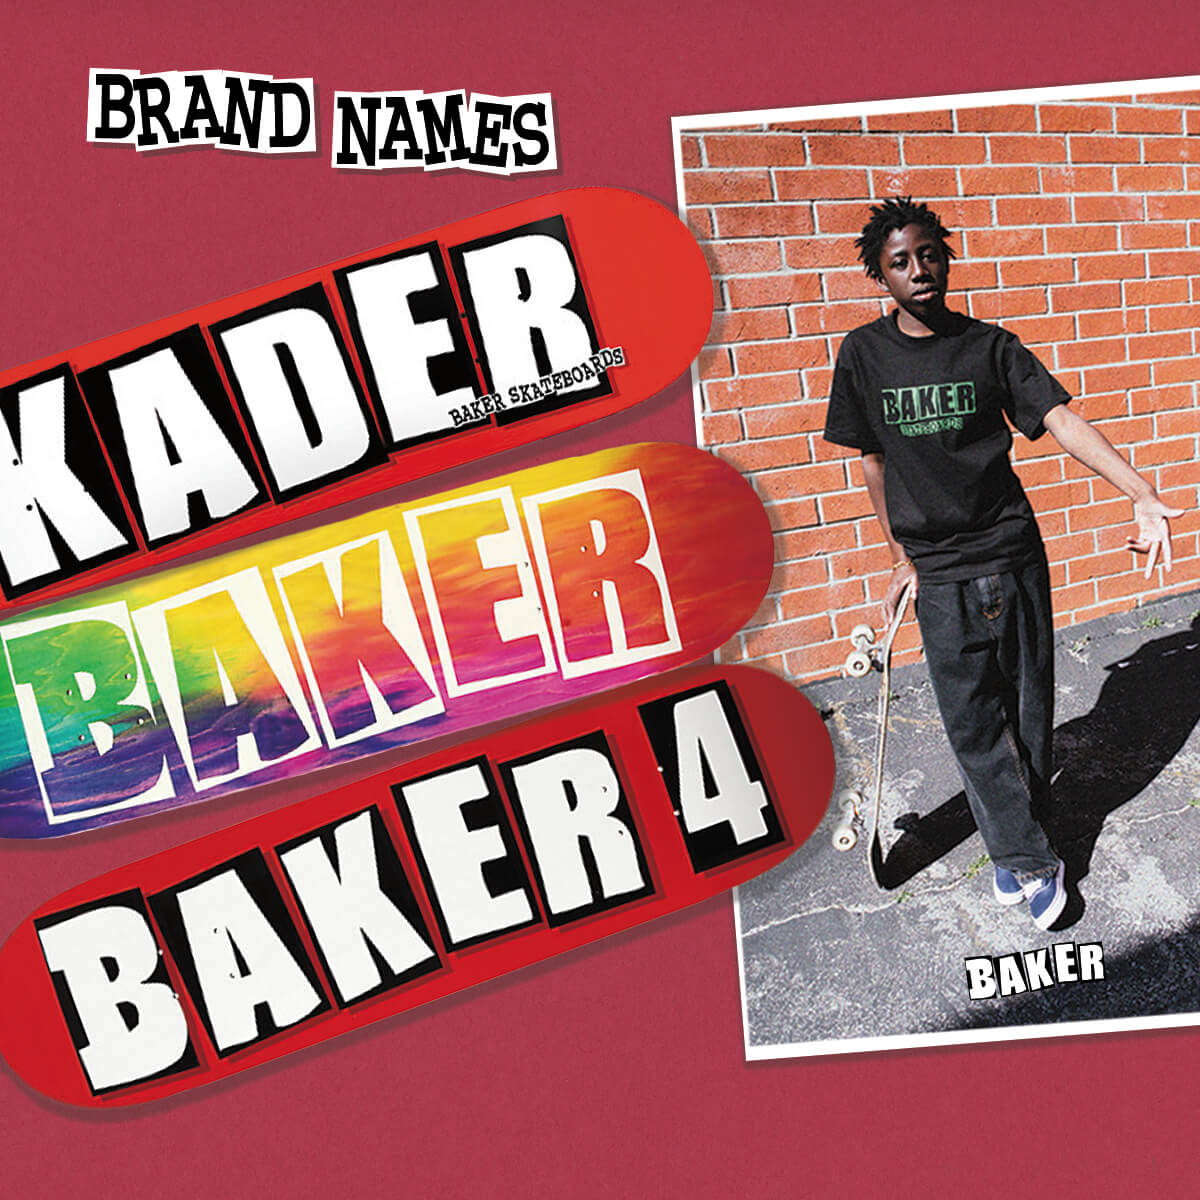 NEW ARRIVAL SKATEBOARDS FROM BAKER & MORE - SHOP NOW